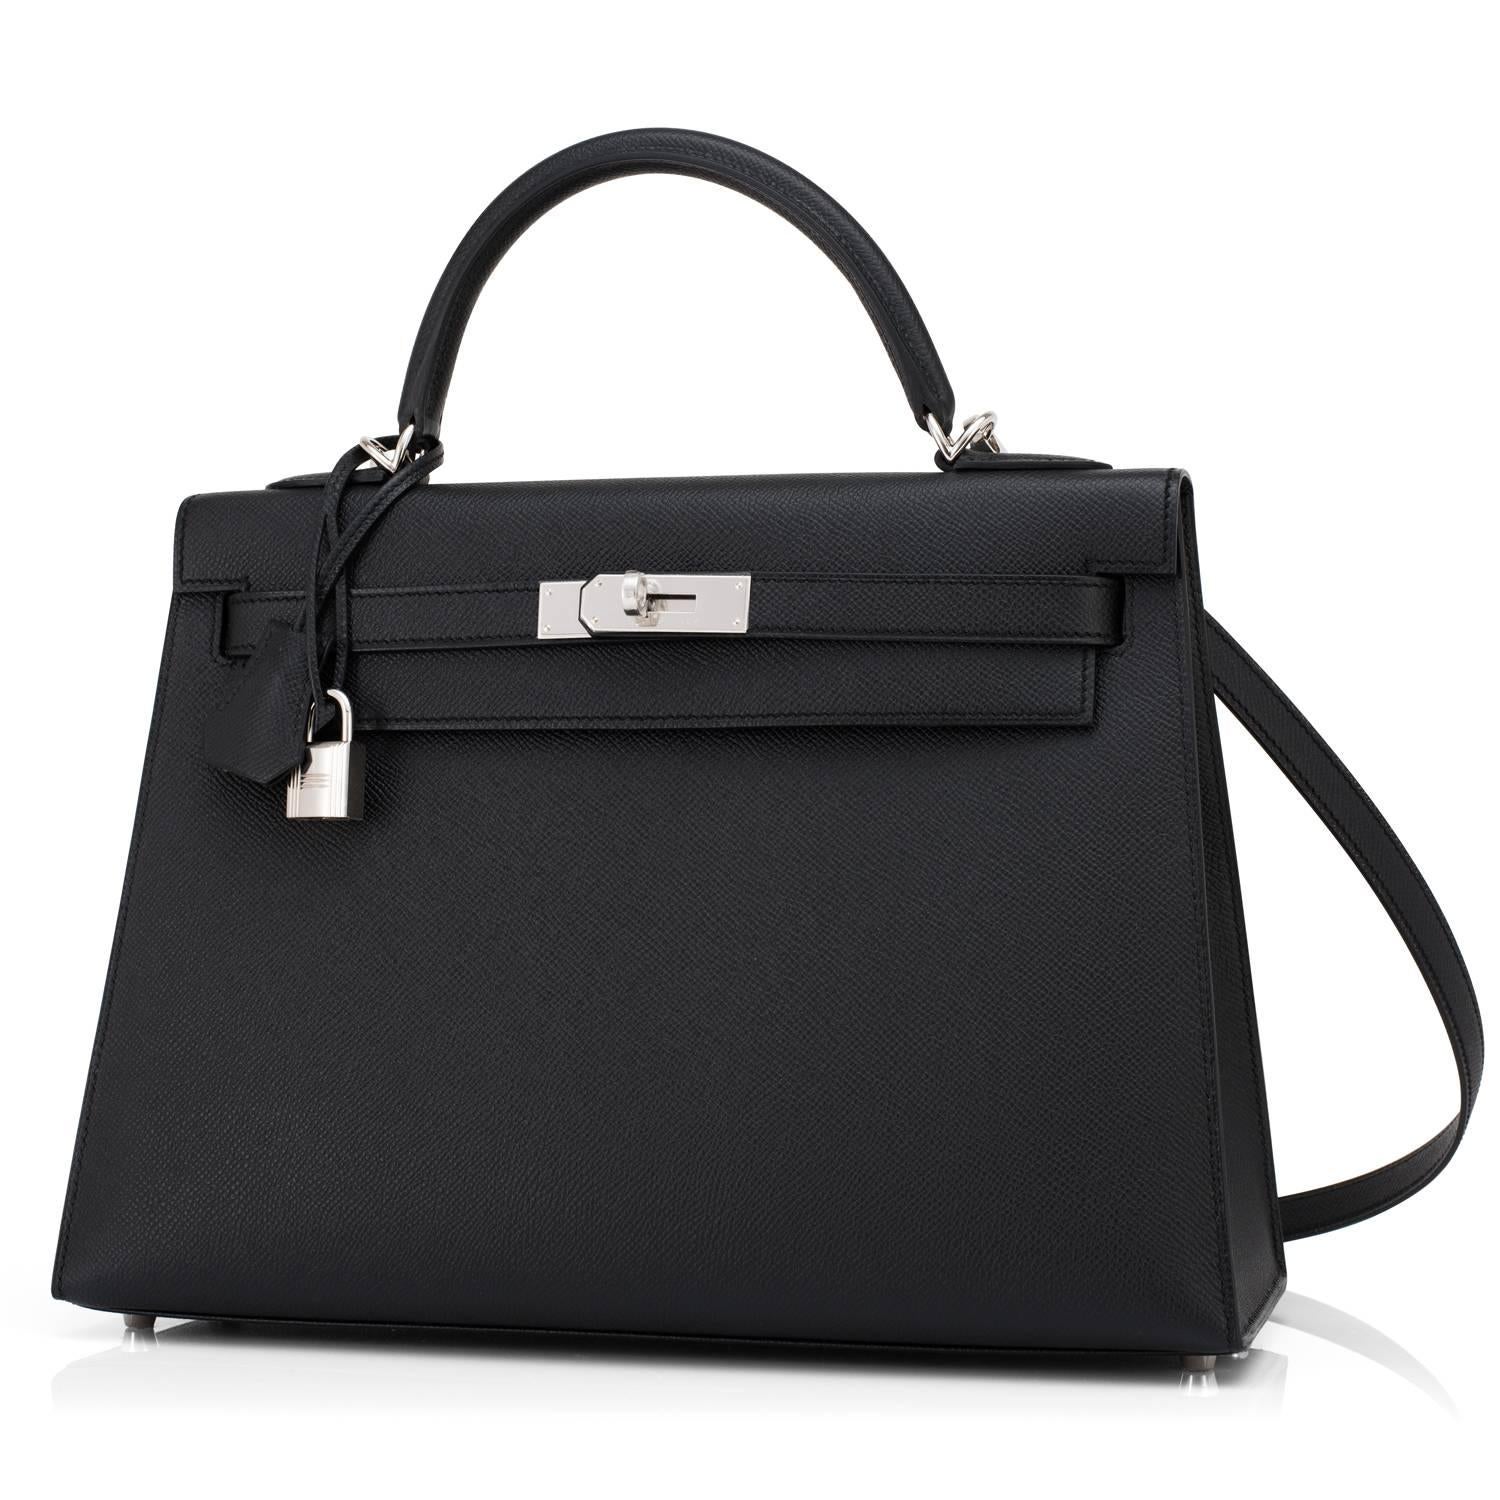 Fashionista Hermes Jet Black 32cm Epsom Sellier Kelly Palladium X Stamp
Brand New in Box. Store Fresh. Pristine Condition (with plastic on hardware).
Just purchased from Hermes store; bag bears new interior X stamp.
Perfect gift! Comes full set with